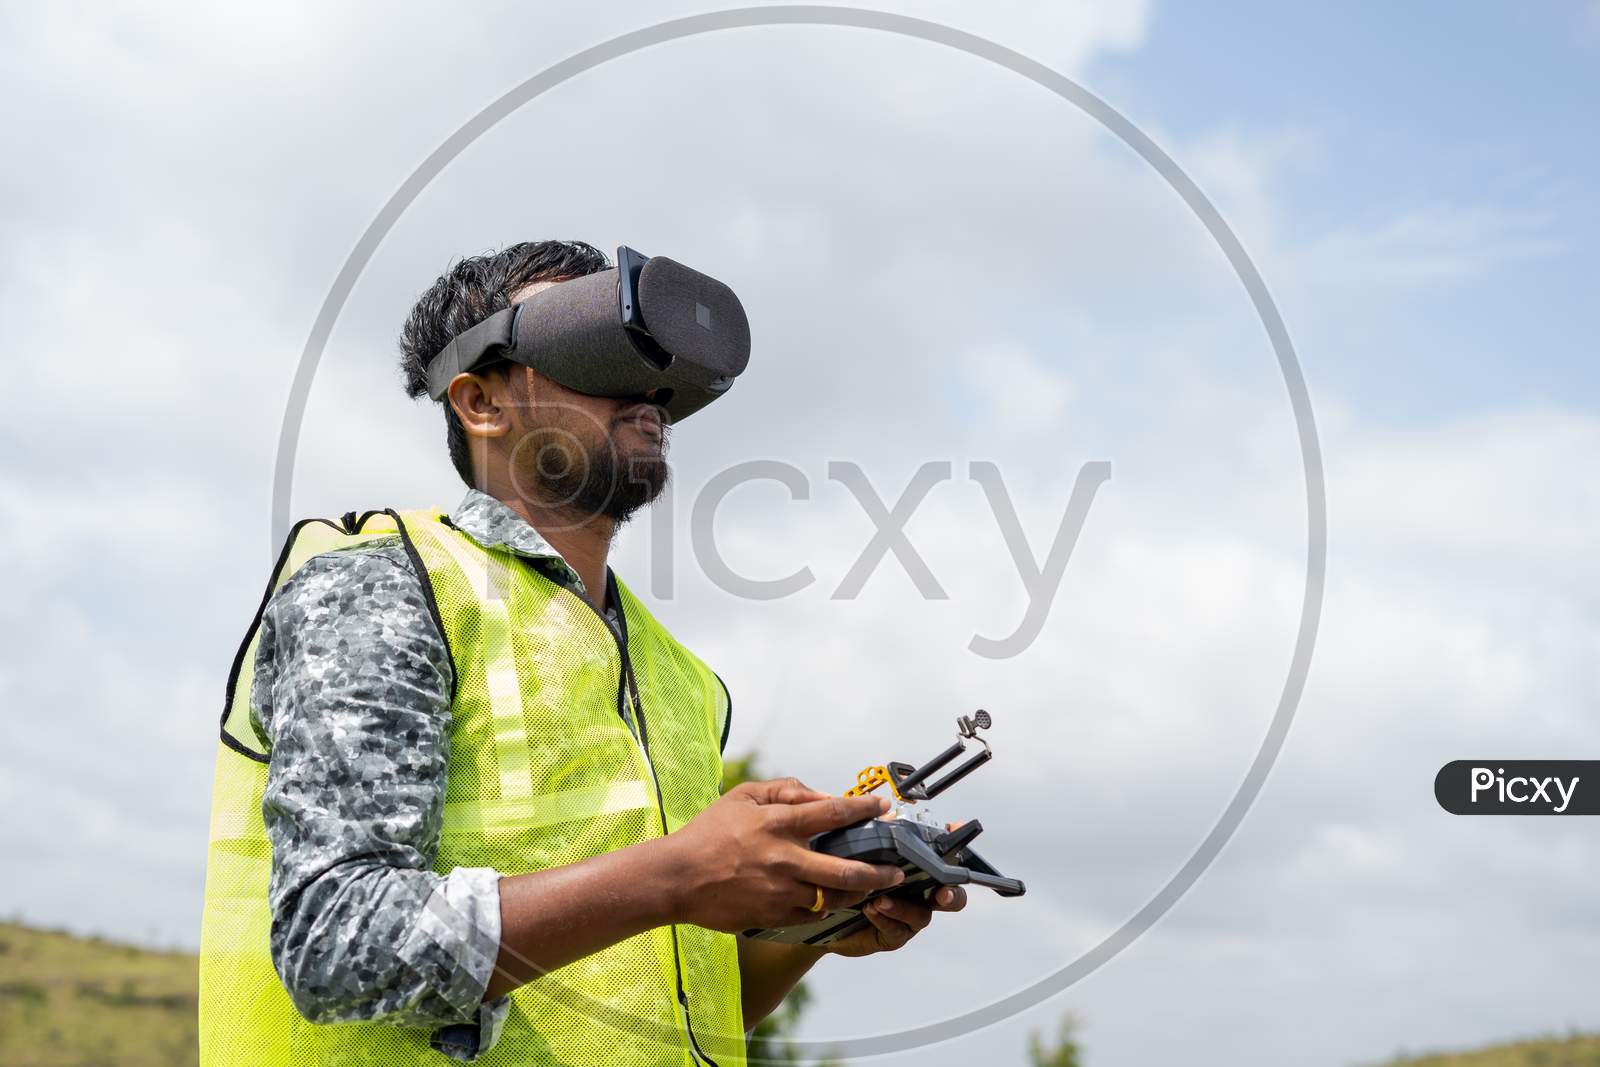 Professional Drone Pilot Controlling Drone By Looking Into Virtual Reality Headset Using Remote Controller - Concept Of Modern Surveillance Technology And Inspection